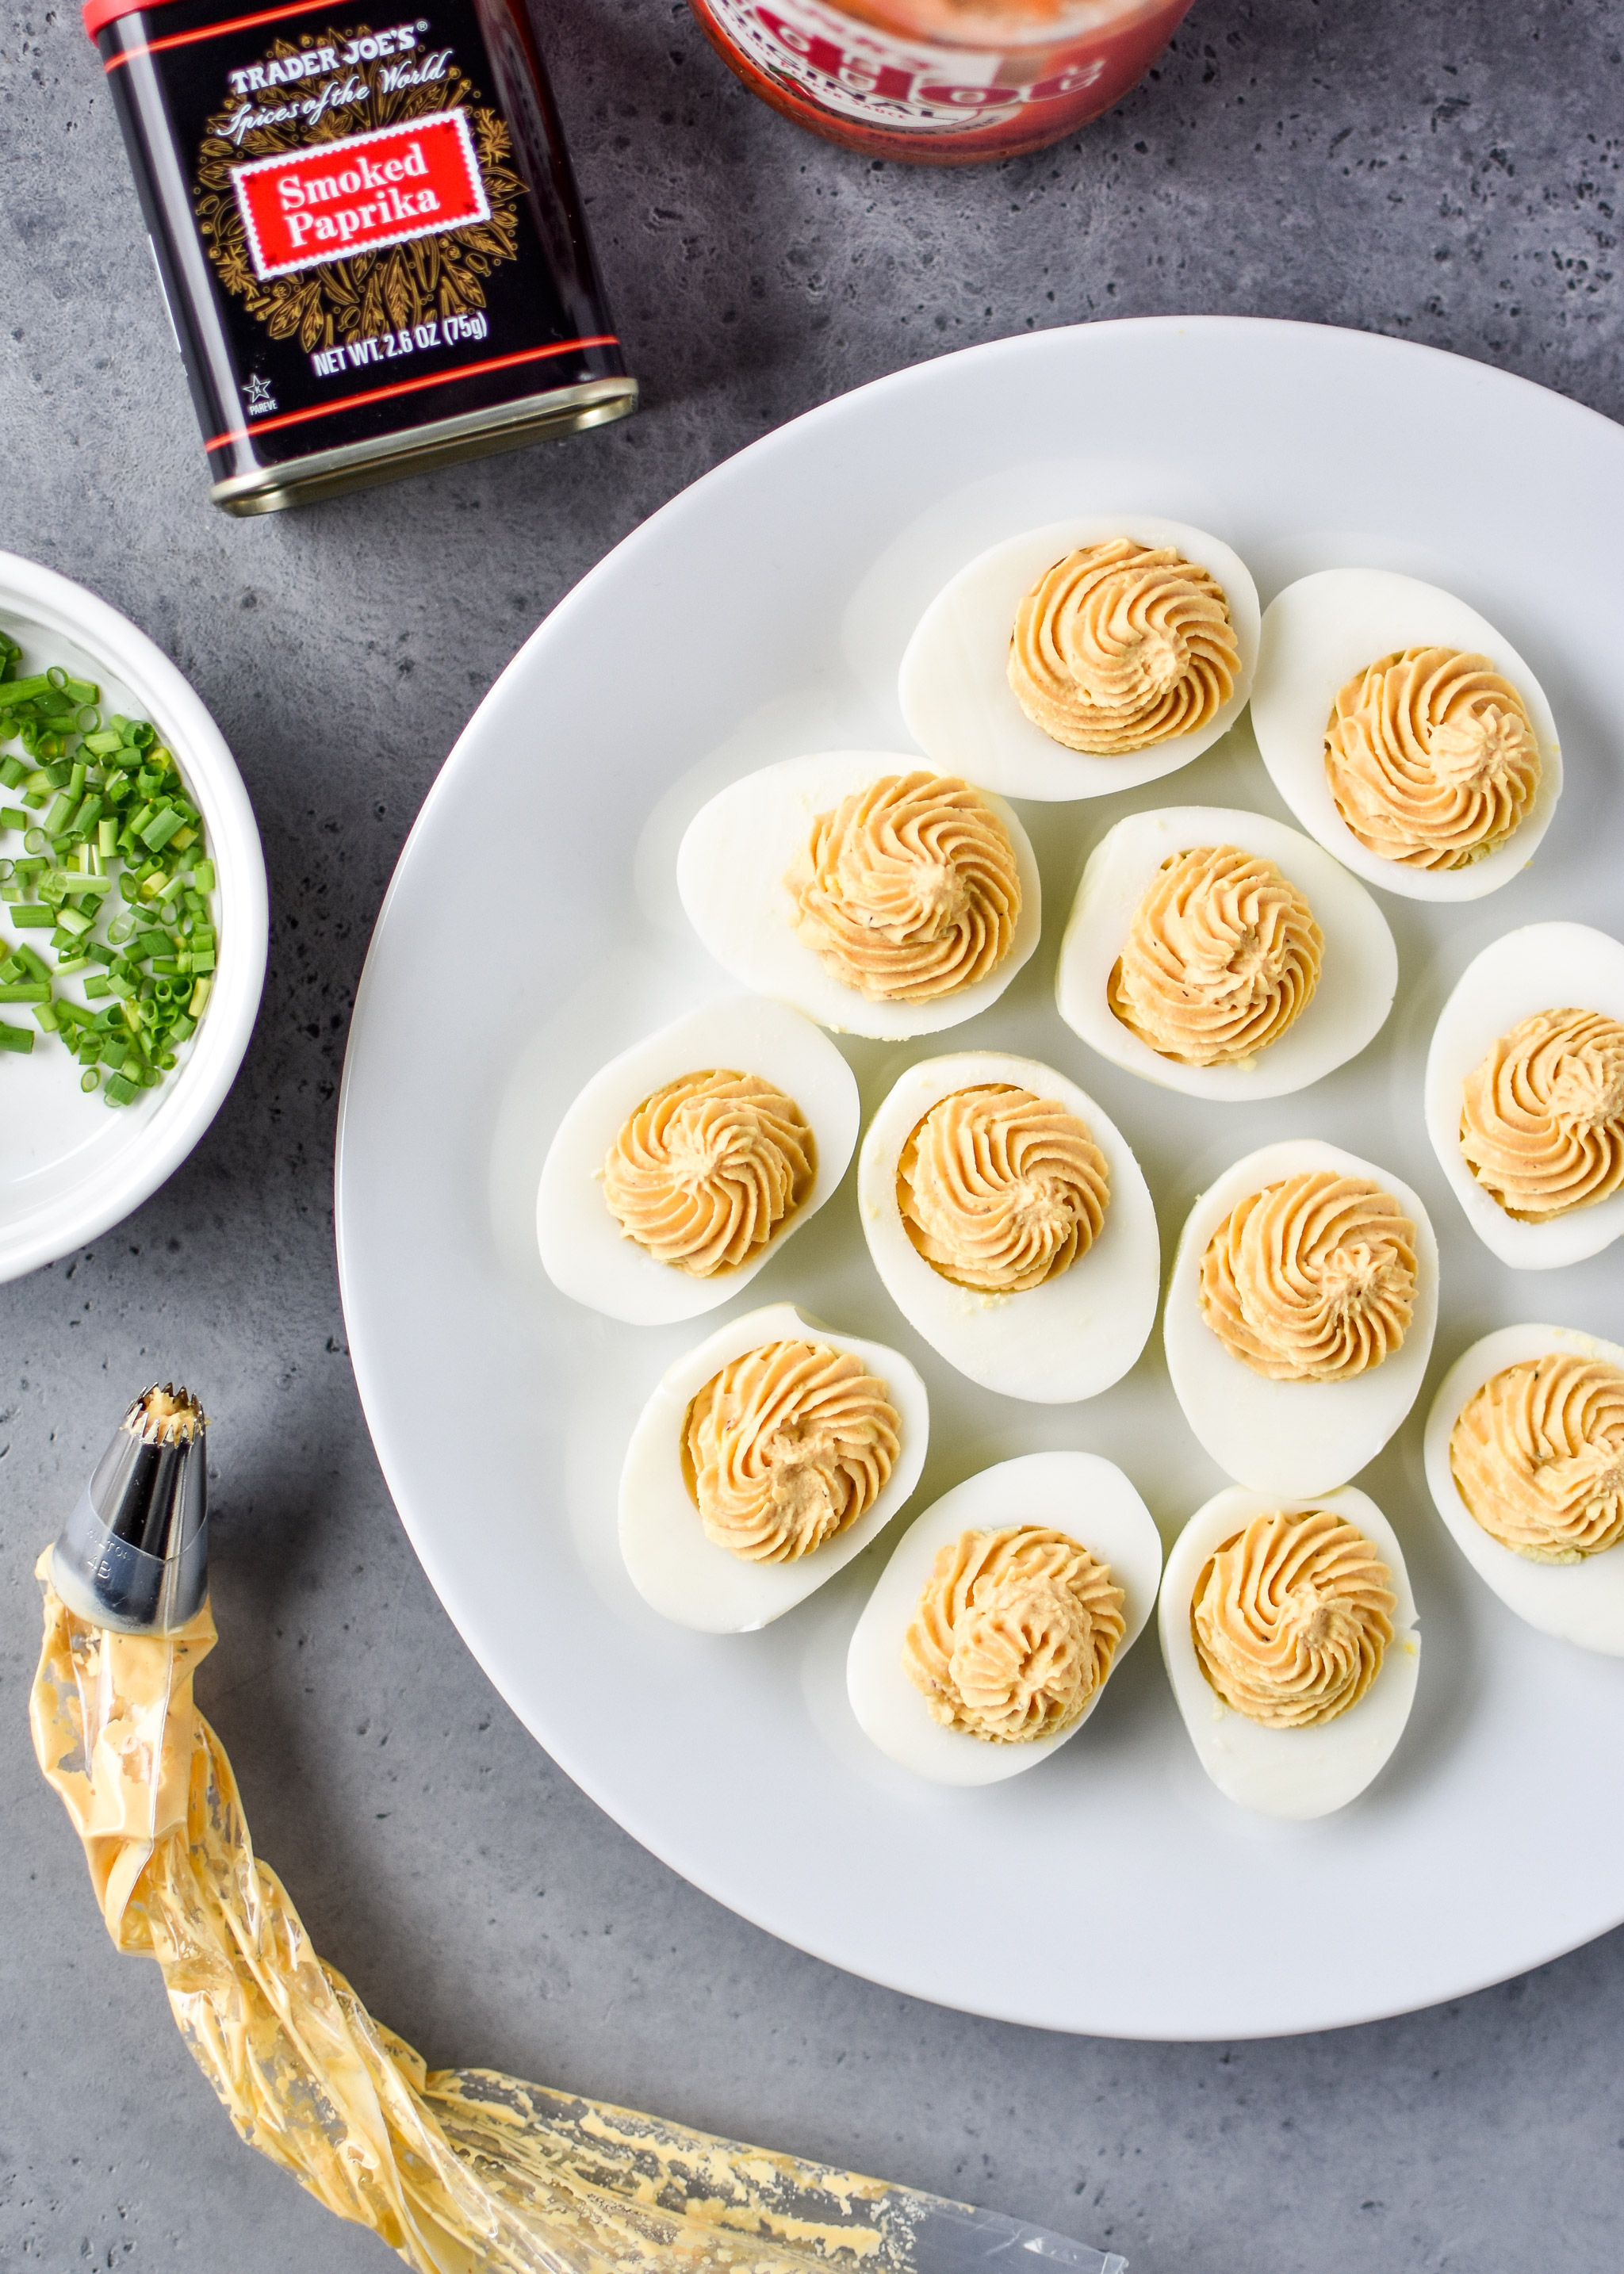 Whole30 Buffalo Deviled Eggs with the yolk mixture just piped into the egg whites.